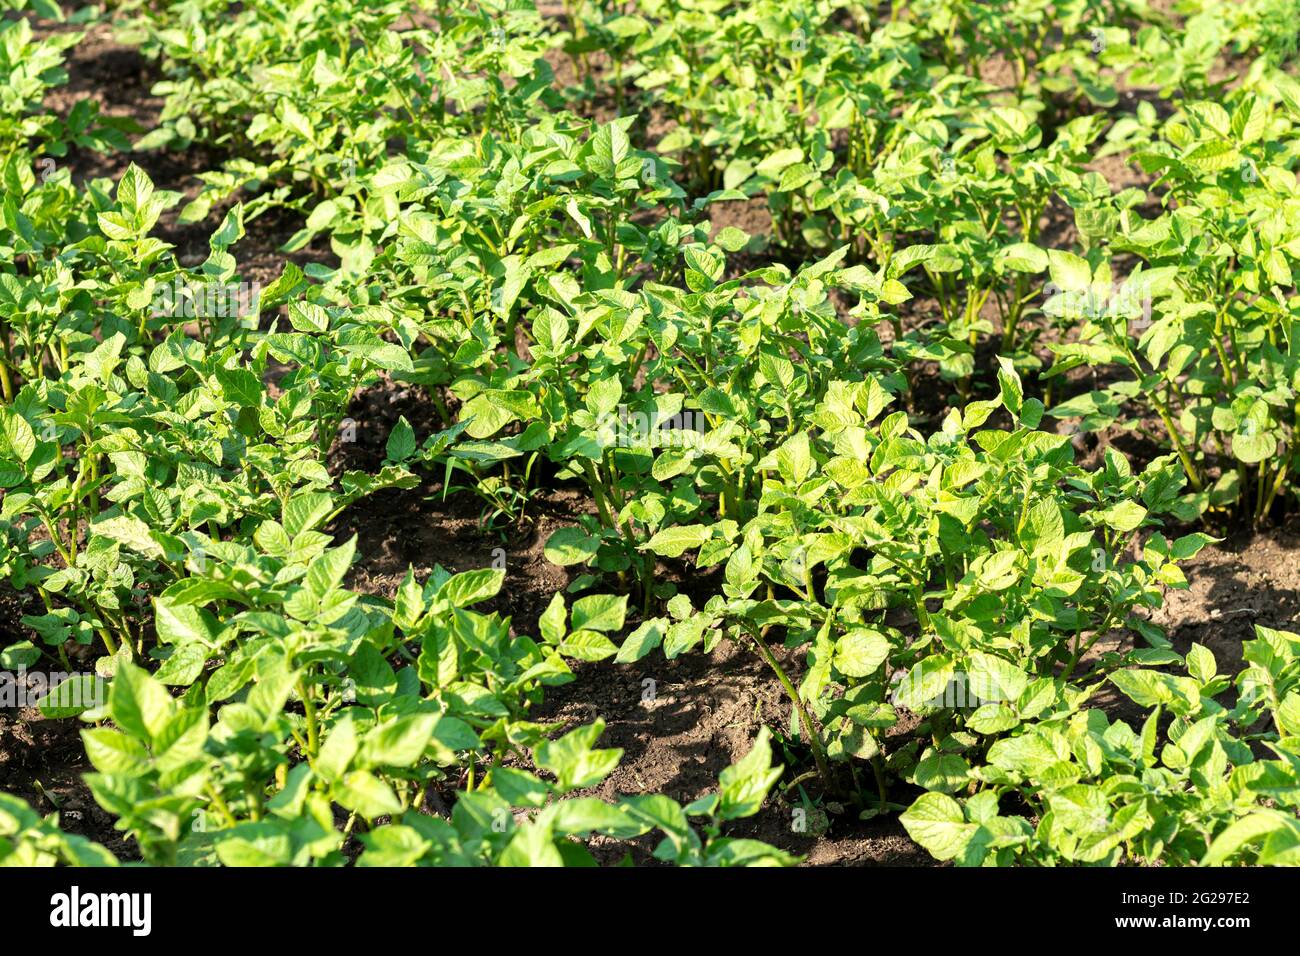 Beds of young organic potato plants growing in vegetable farm field Stock Photo